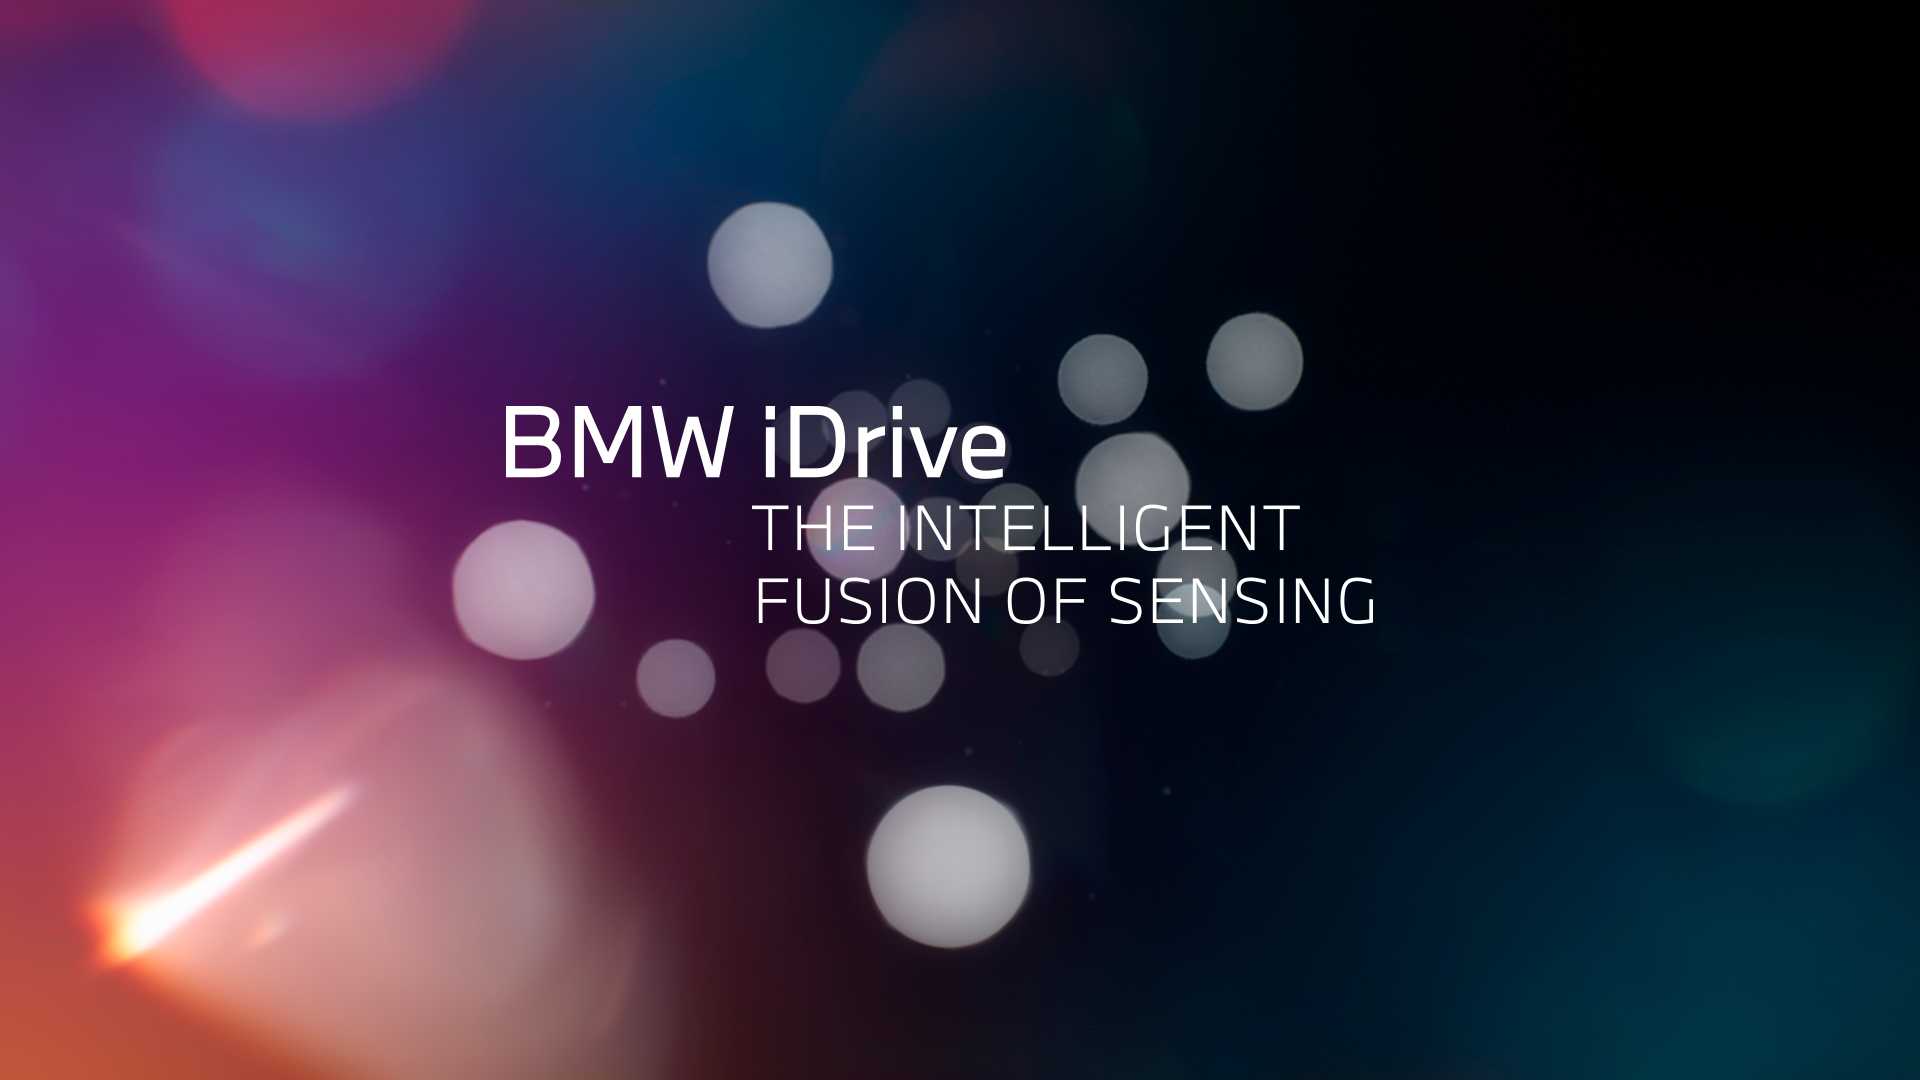 Bmw Announces The Future Of The Display And Operating System Bmw Idrive At The Ces 2021